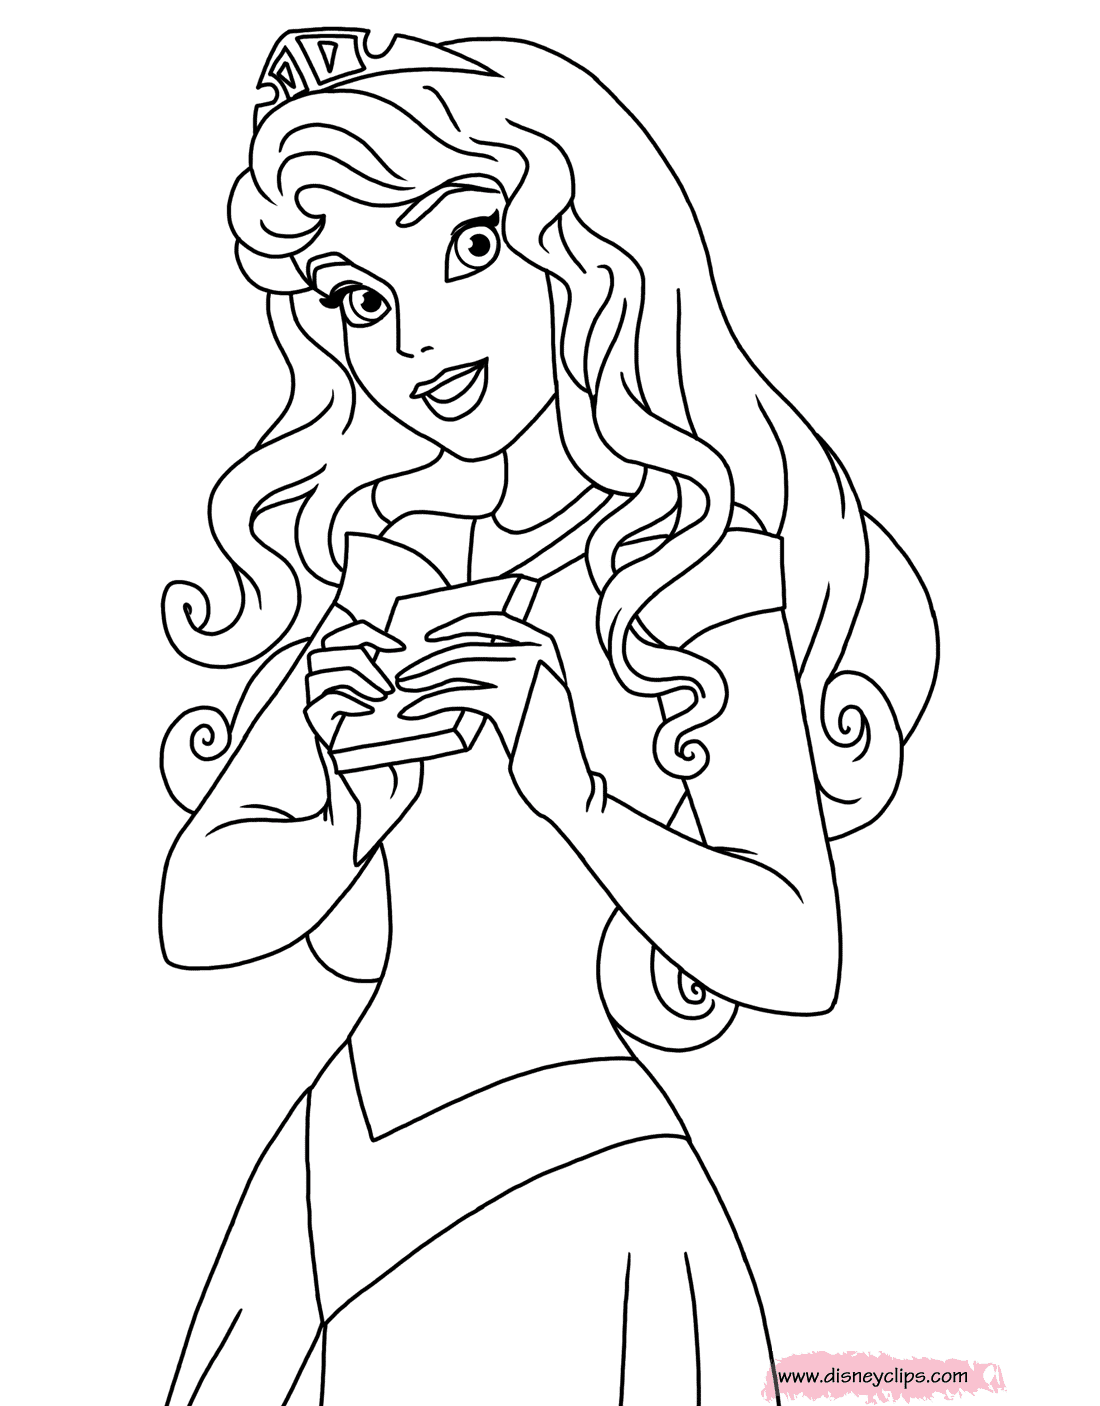 Aurora holding a book Coloring Page